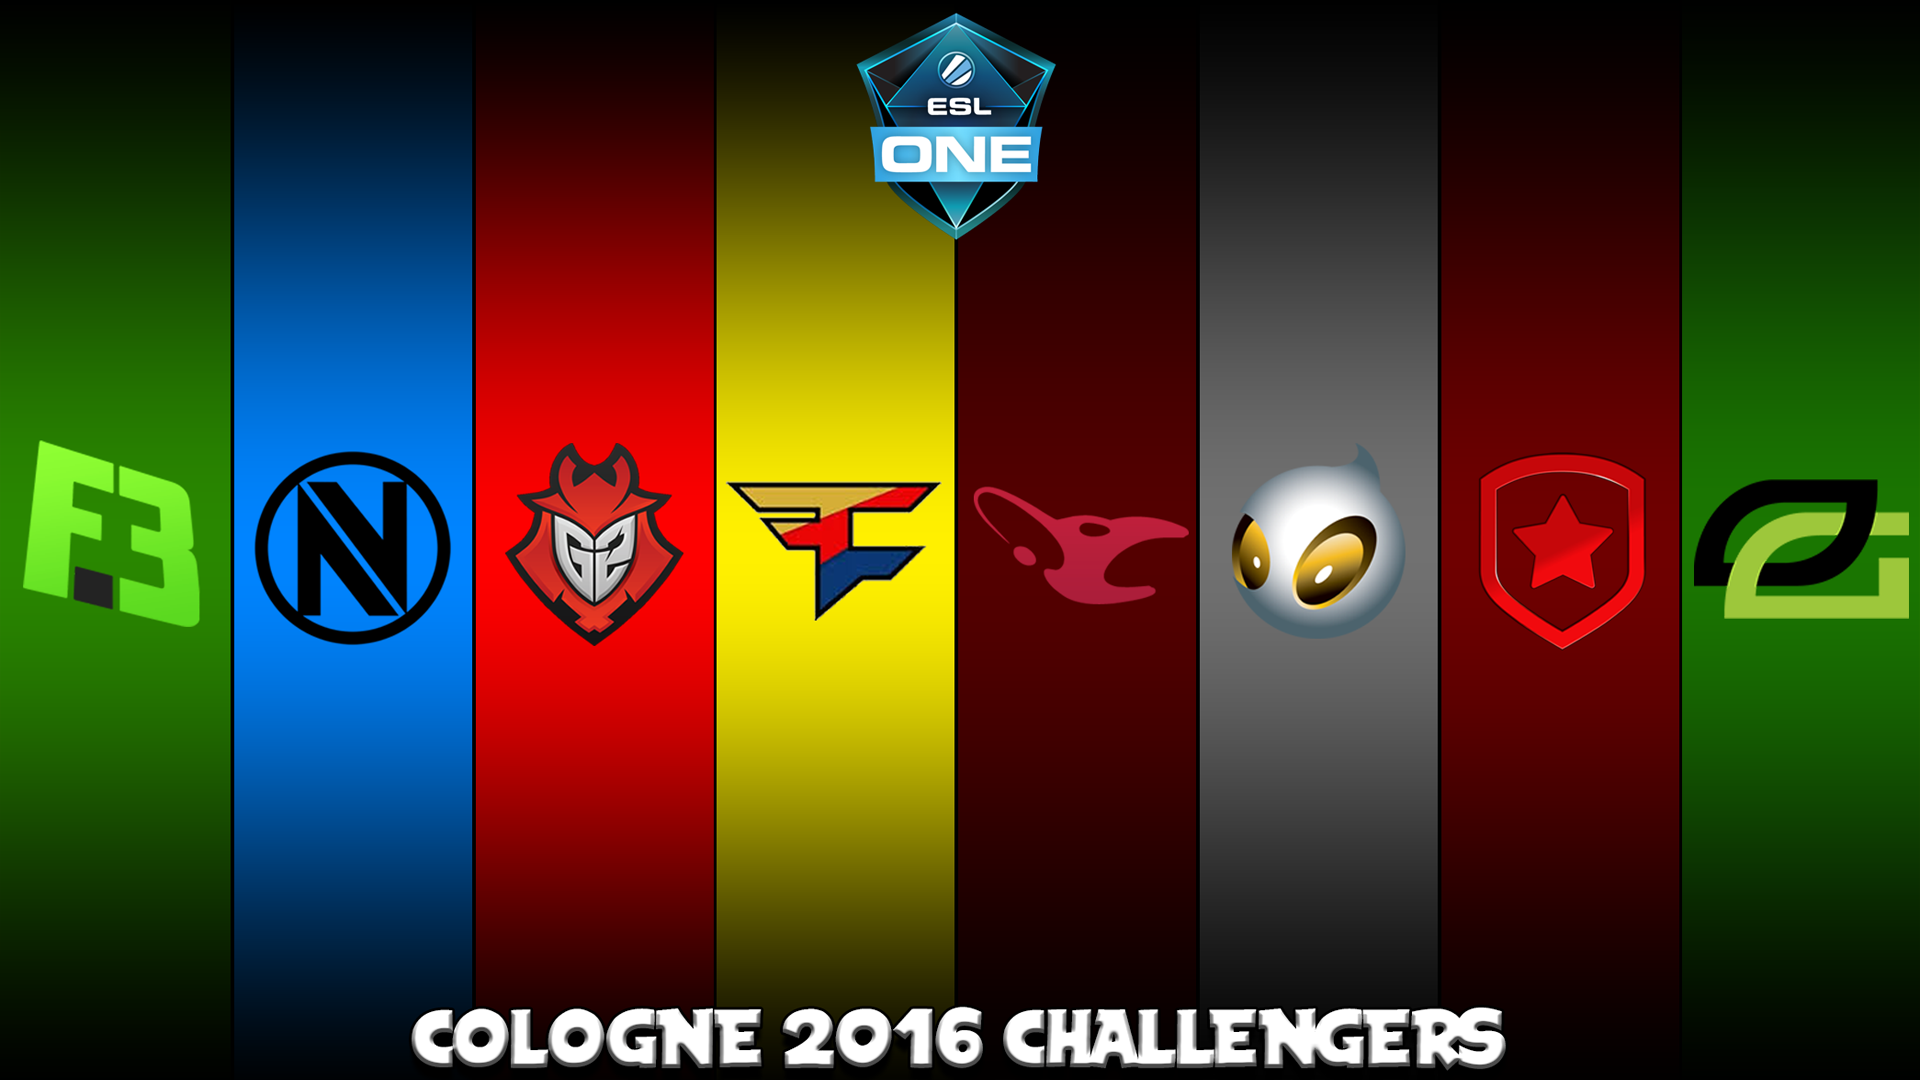 Cologne 2016 Challengers wallpaper